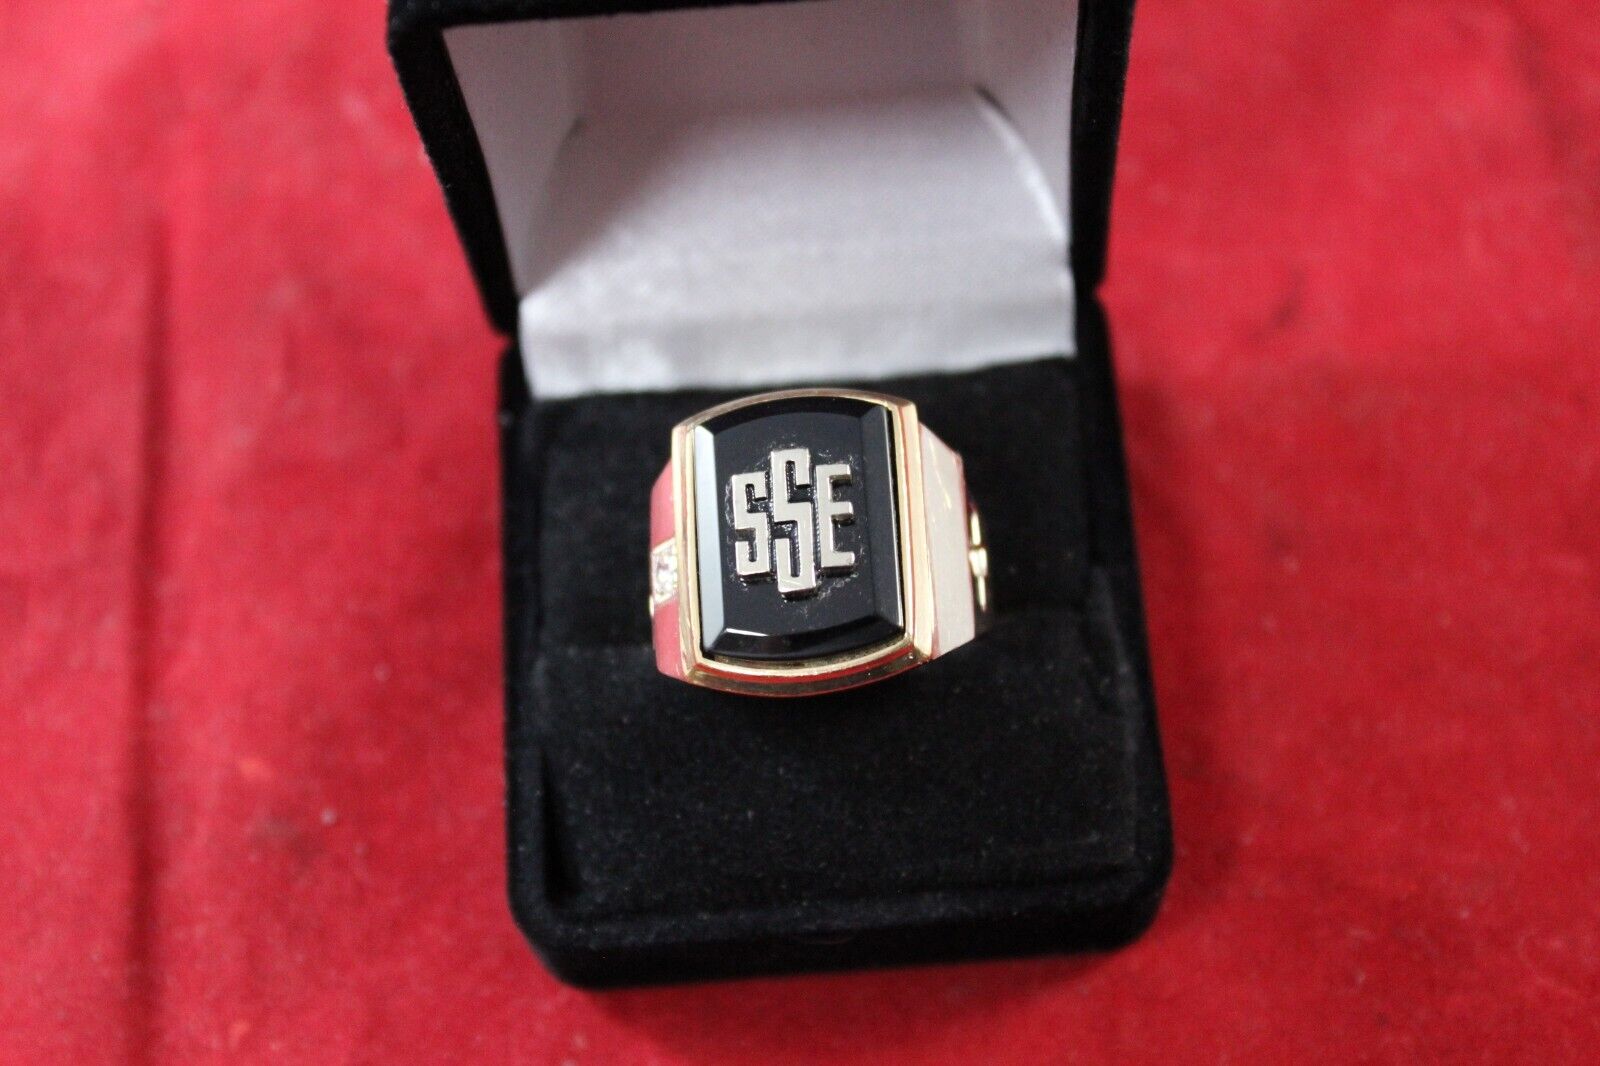 10K GM Chevrolet SSE Society Of Sales Executives Awards Ring Size 11